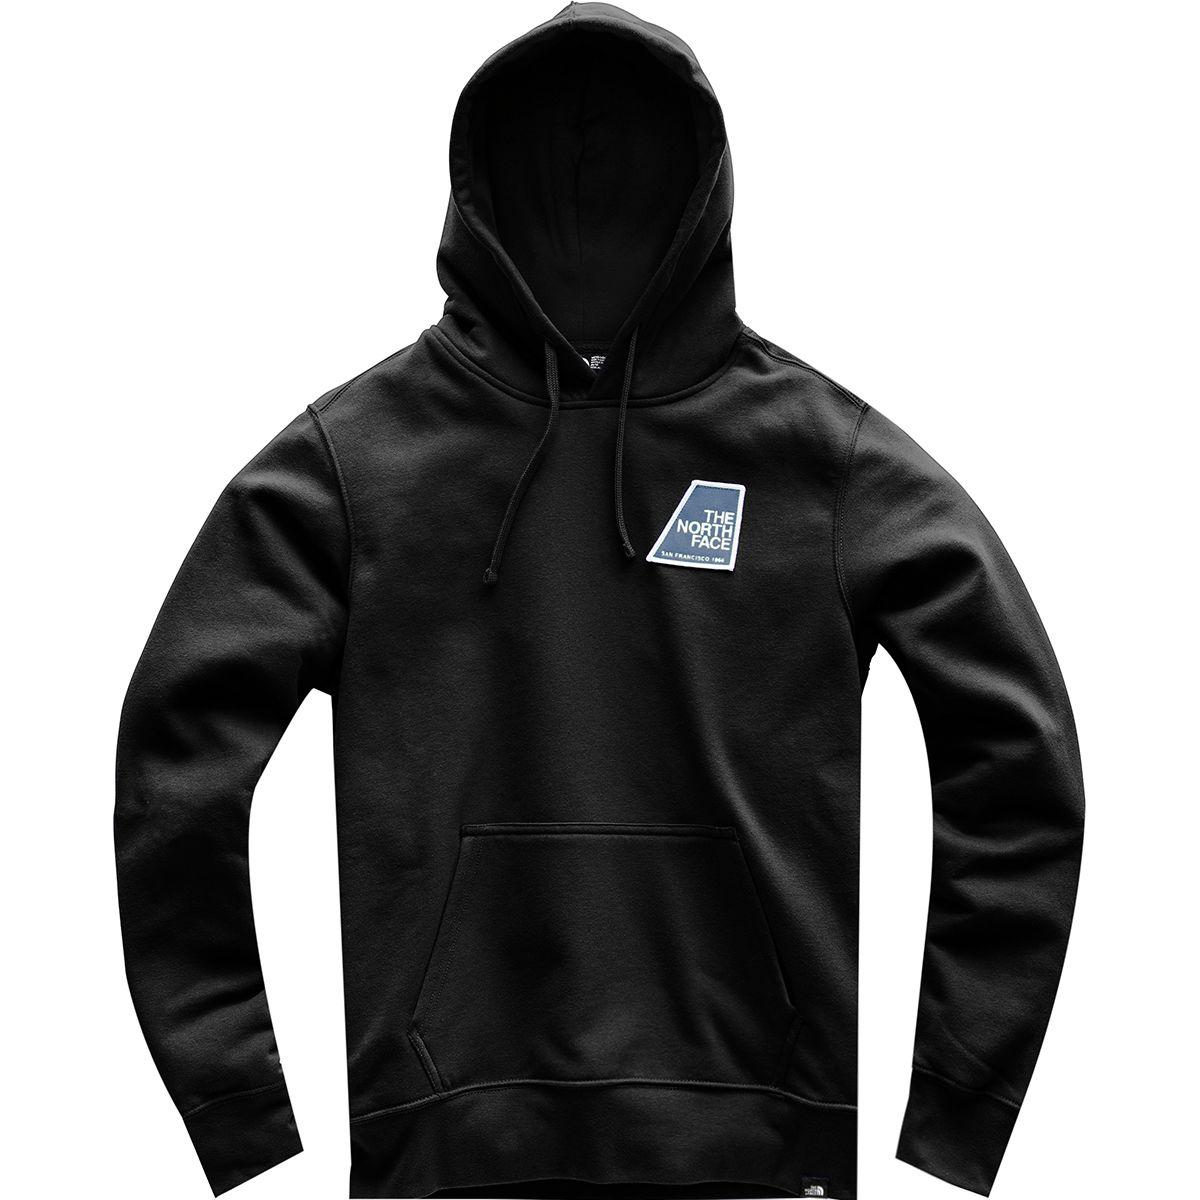 The North Face Cotton Graphic Patch Pullover Hoodie in Black for Men - Lyst